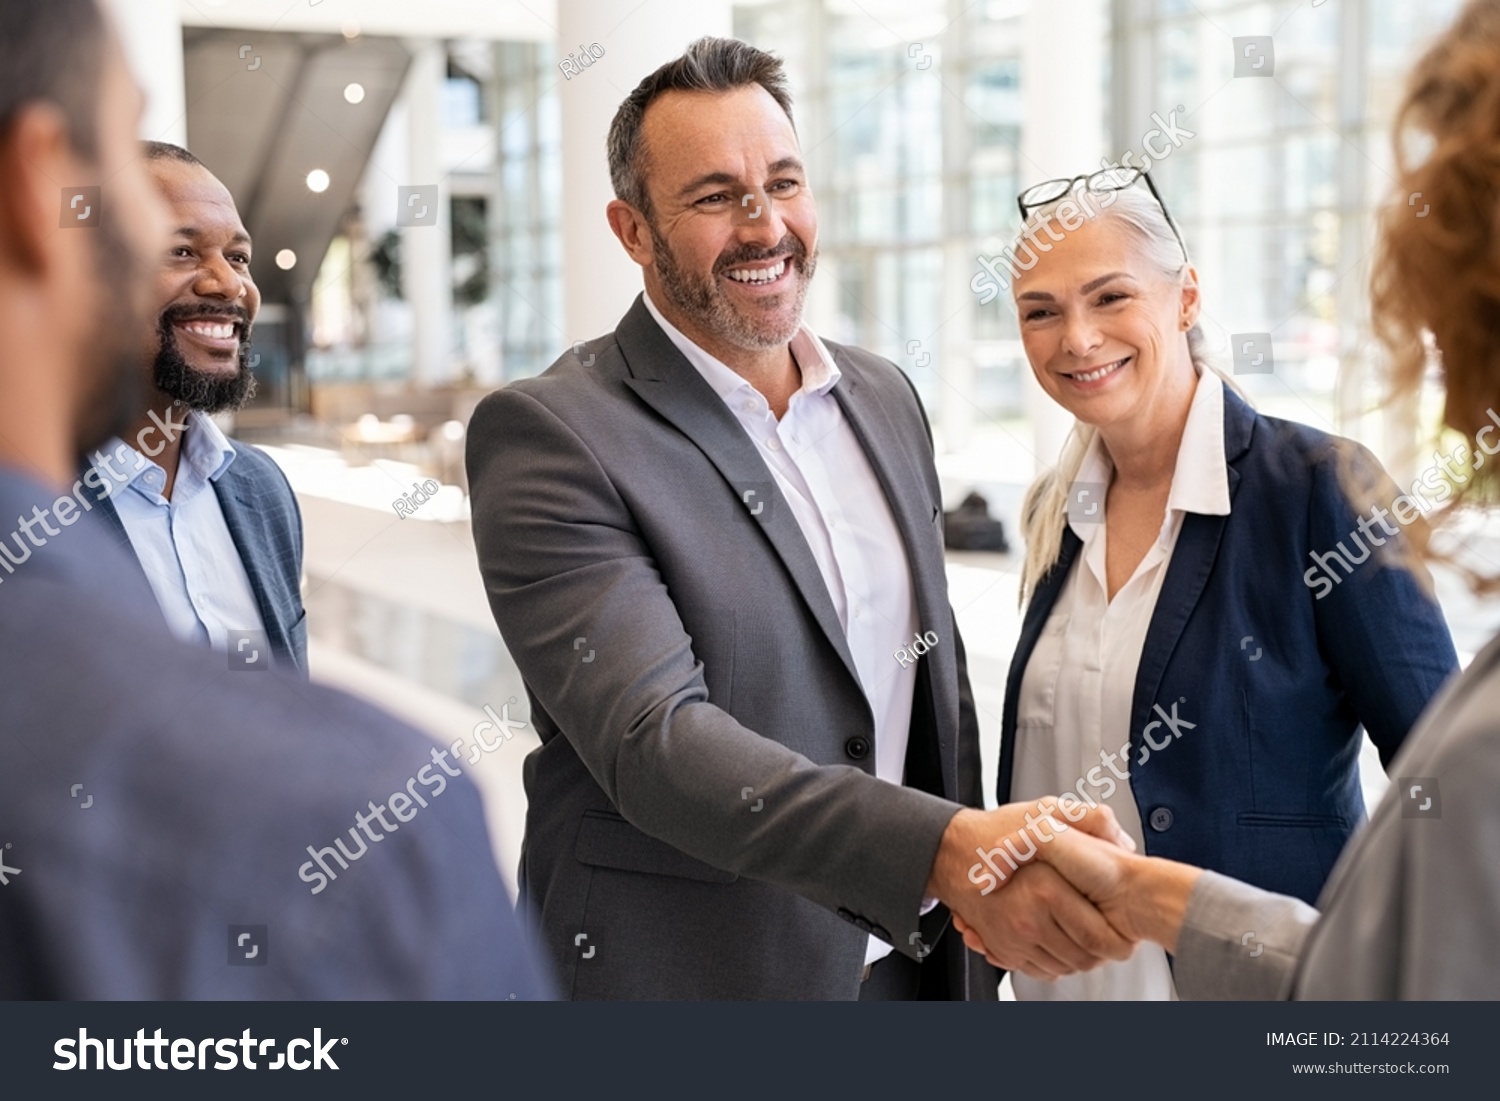 Happy mature businessman shaking hands with businesswoman in modern office. Successful entrepreneur greeting business woman with handshake. Agreement and business deal concept. #2114224364